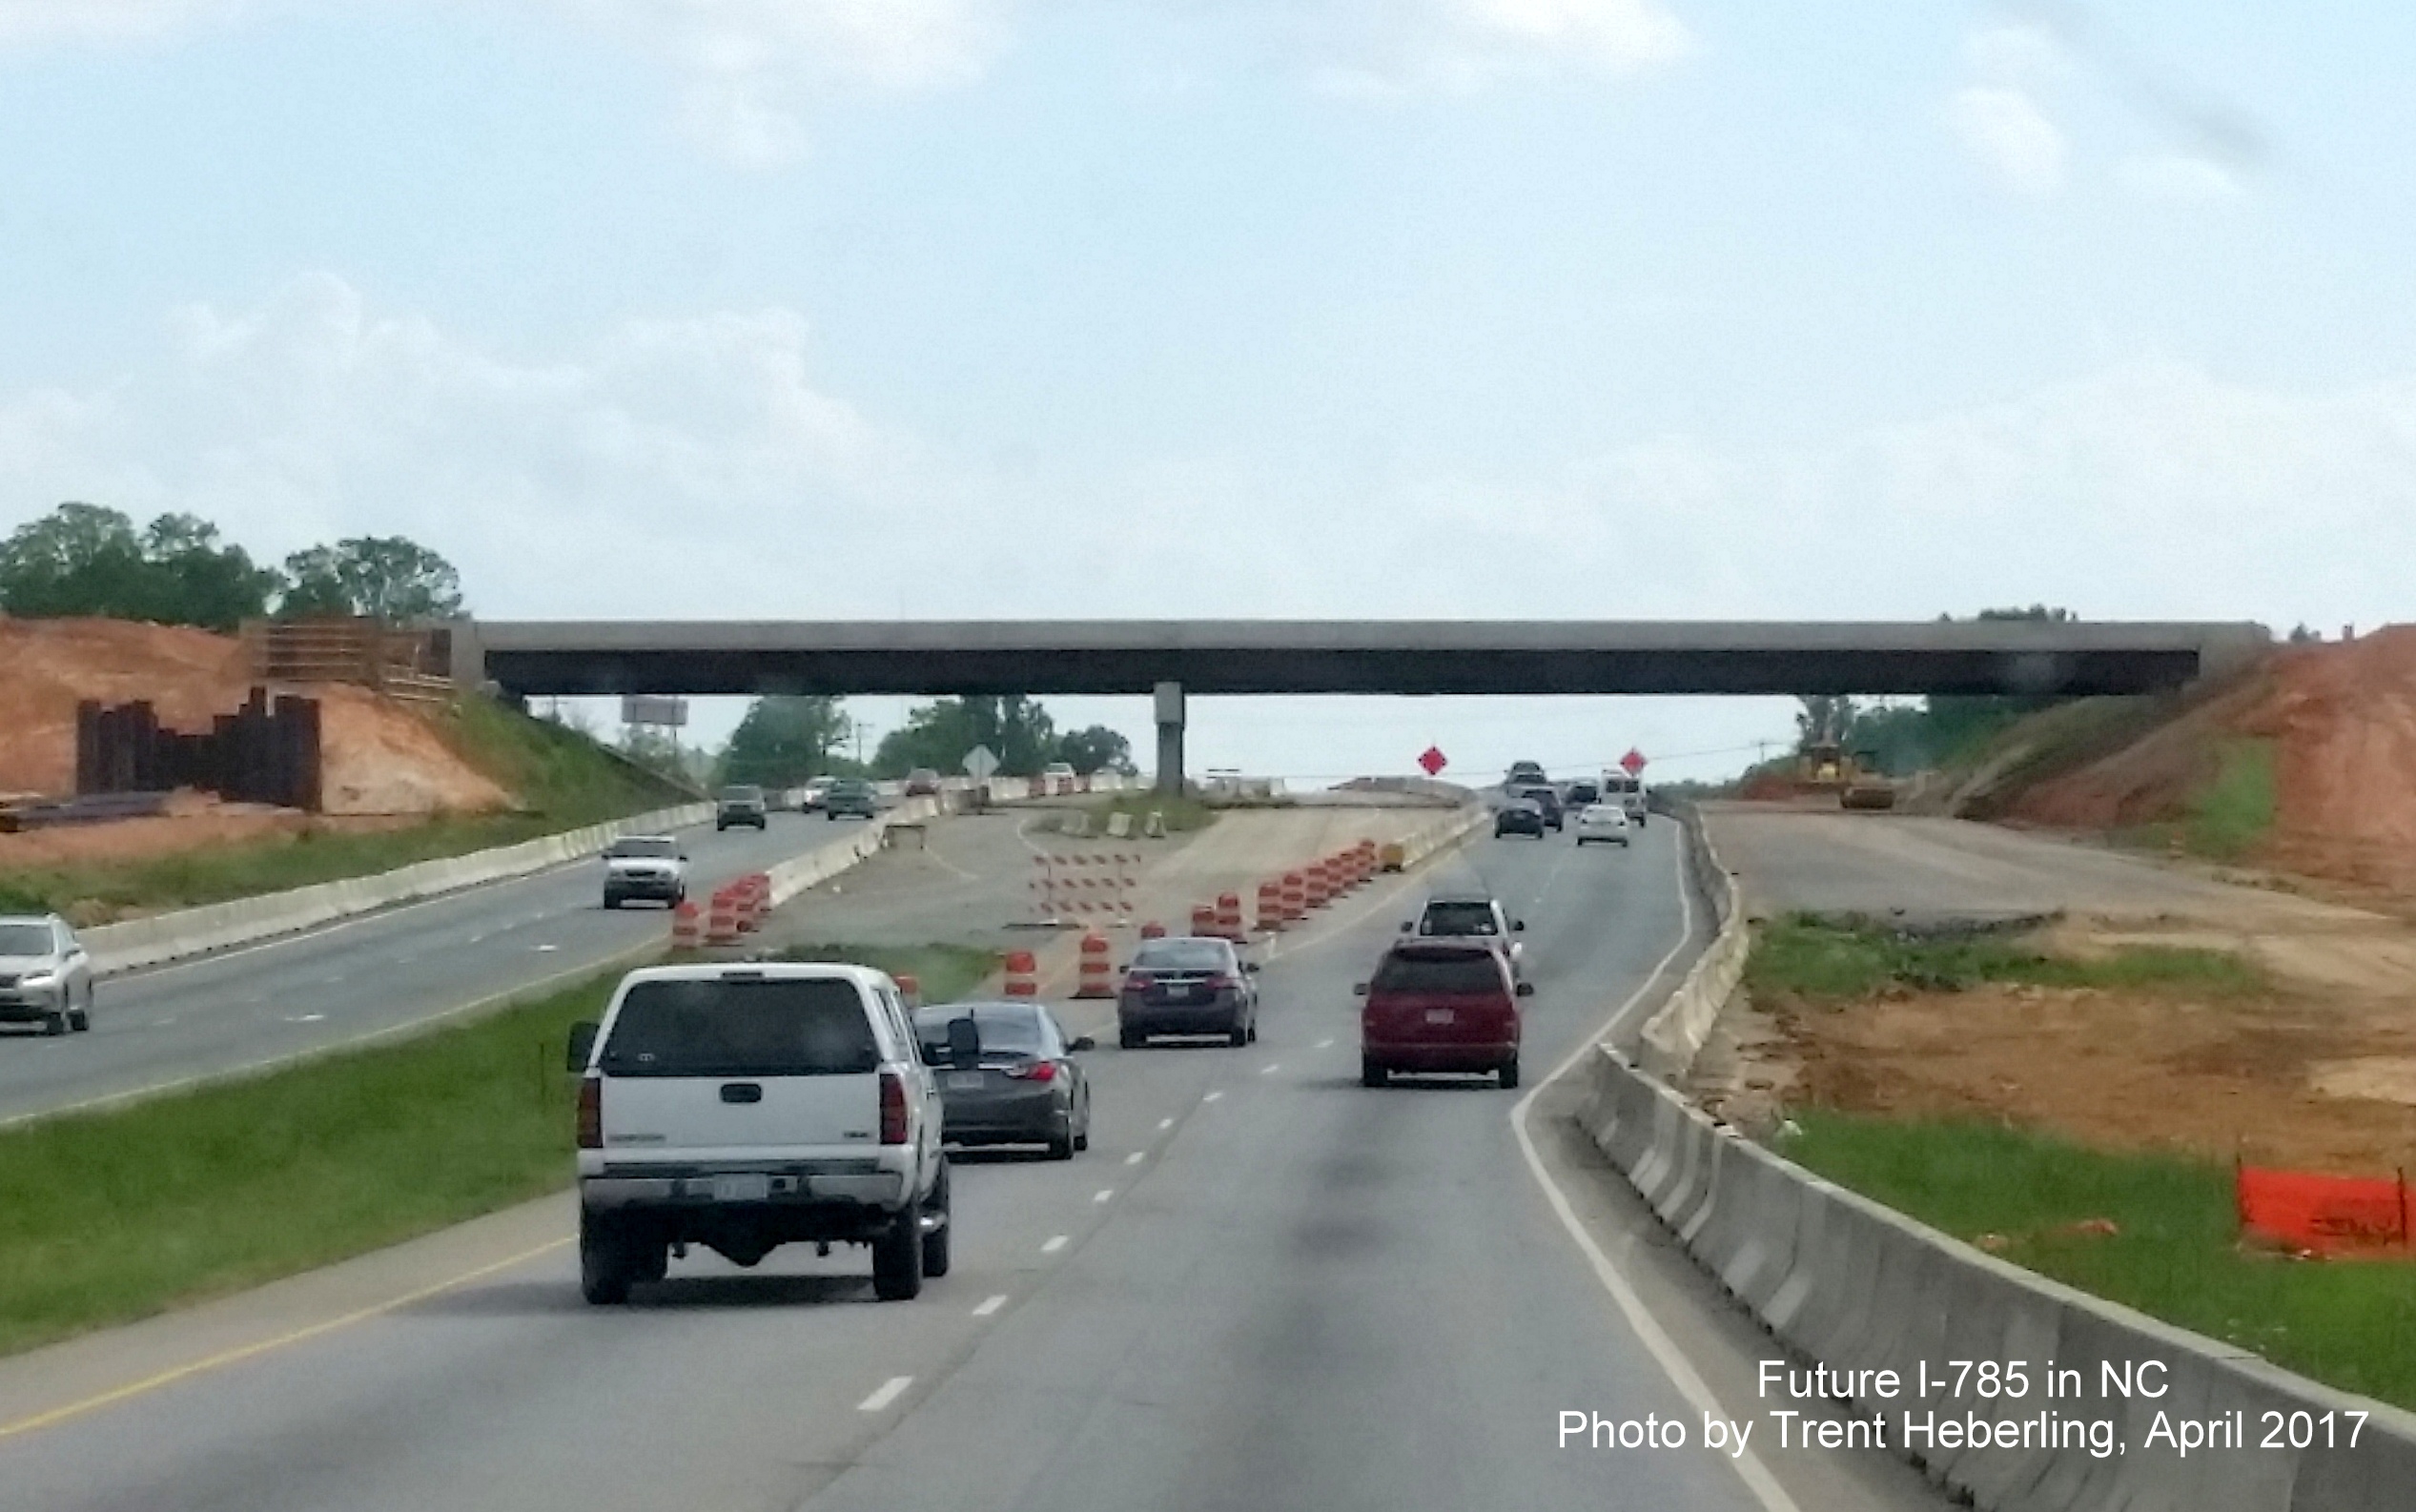 Image of traffic on US 29 South traveling through Future I-785/Greensboro Loop interchange construction area, by Trent Heberling